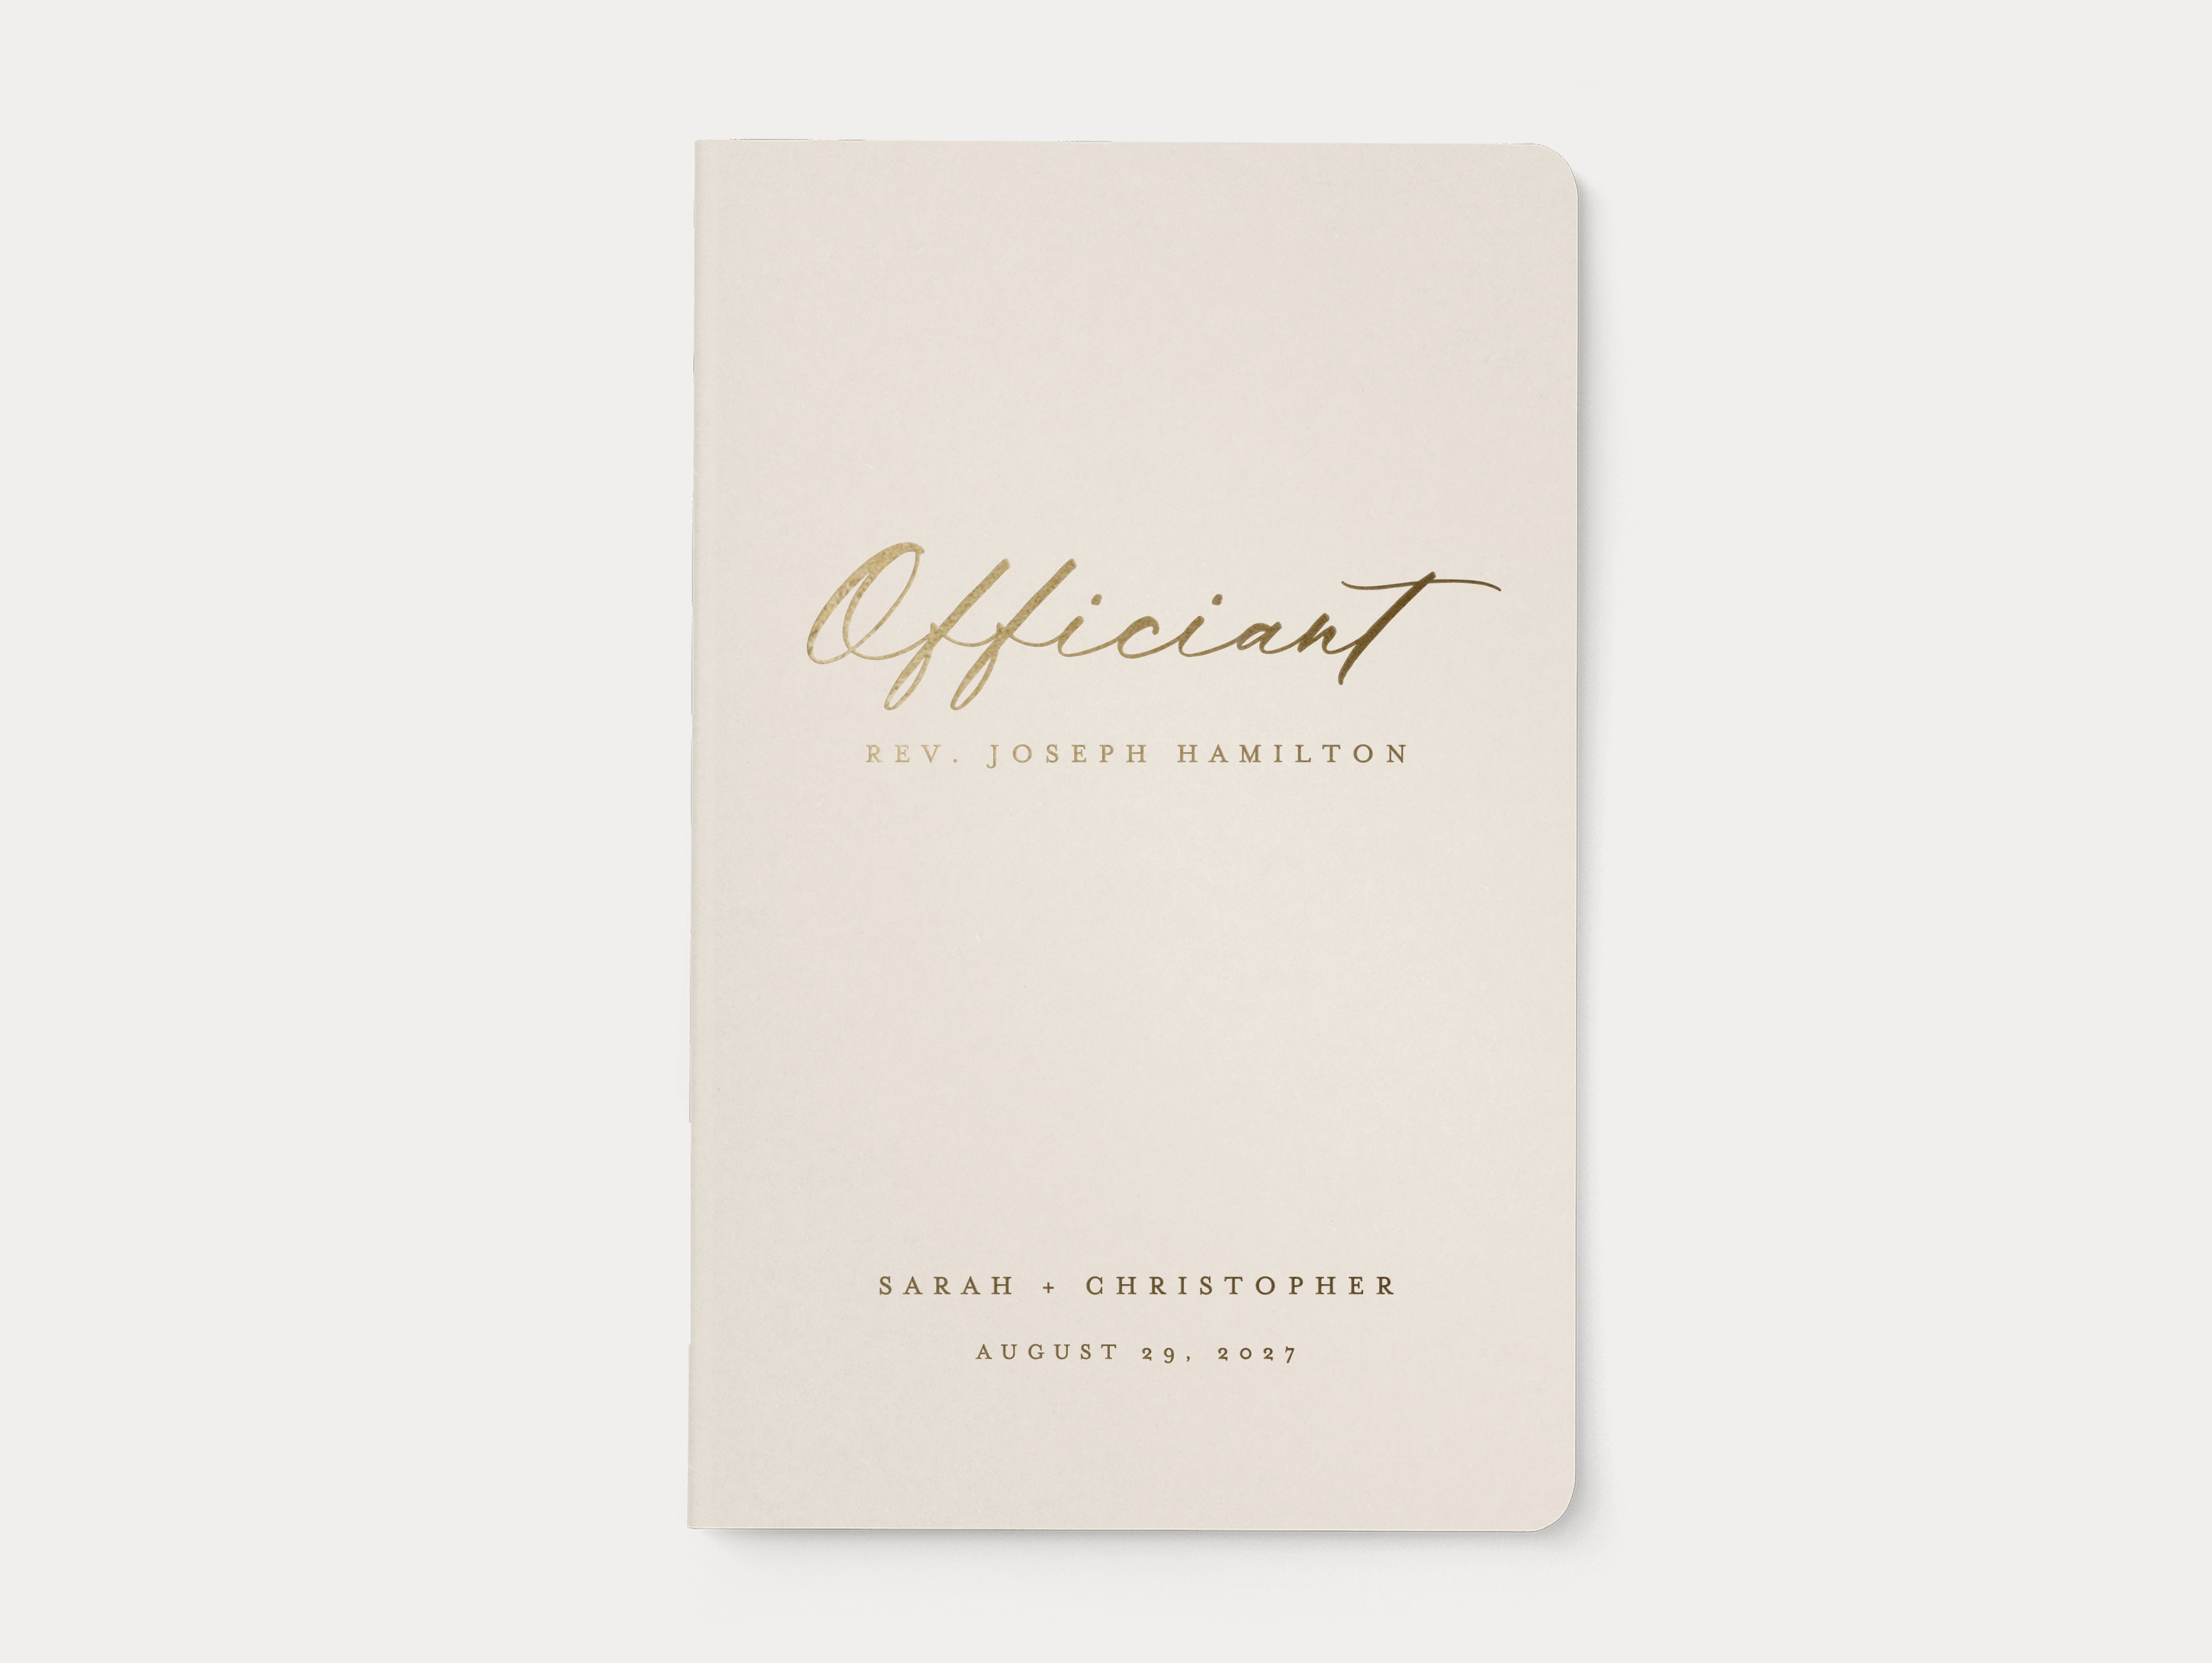 Custom gold foil officiant book for ceremony.